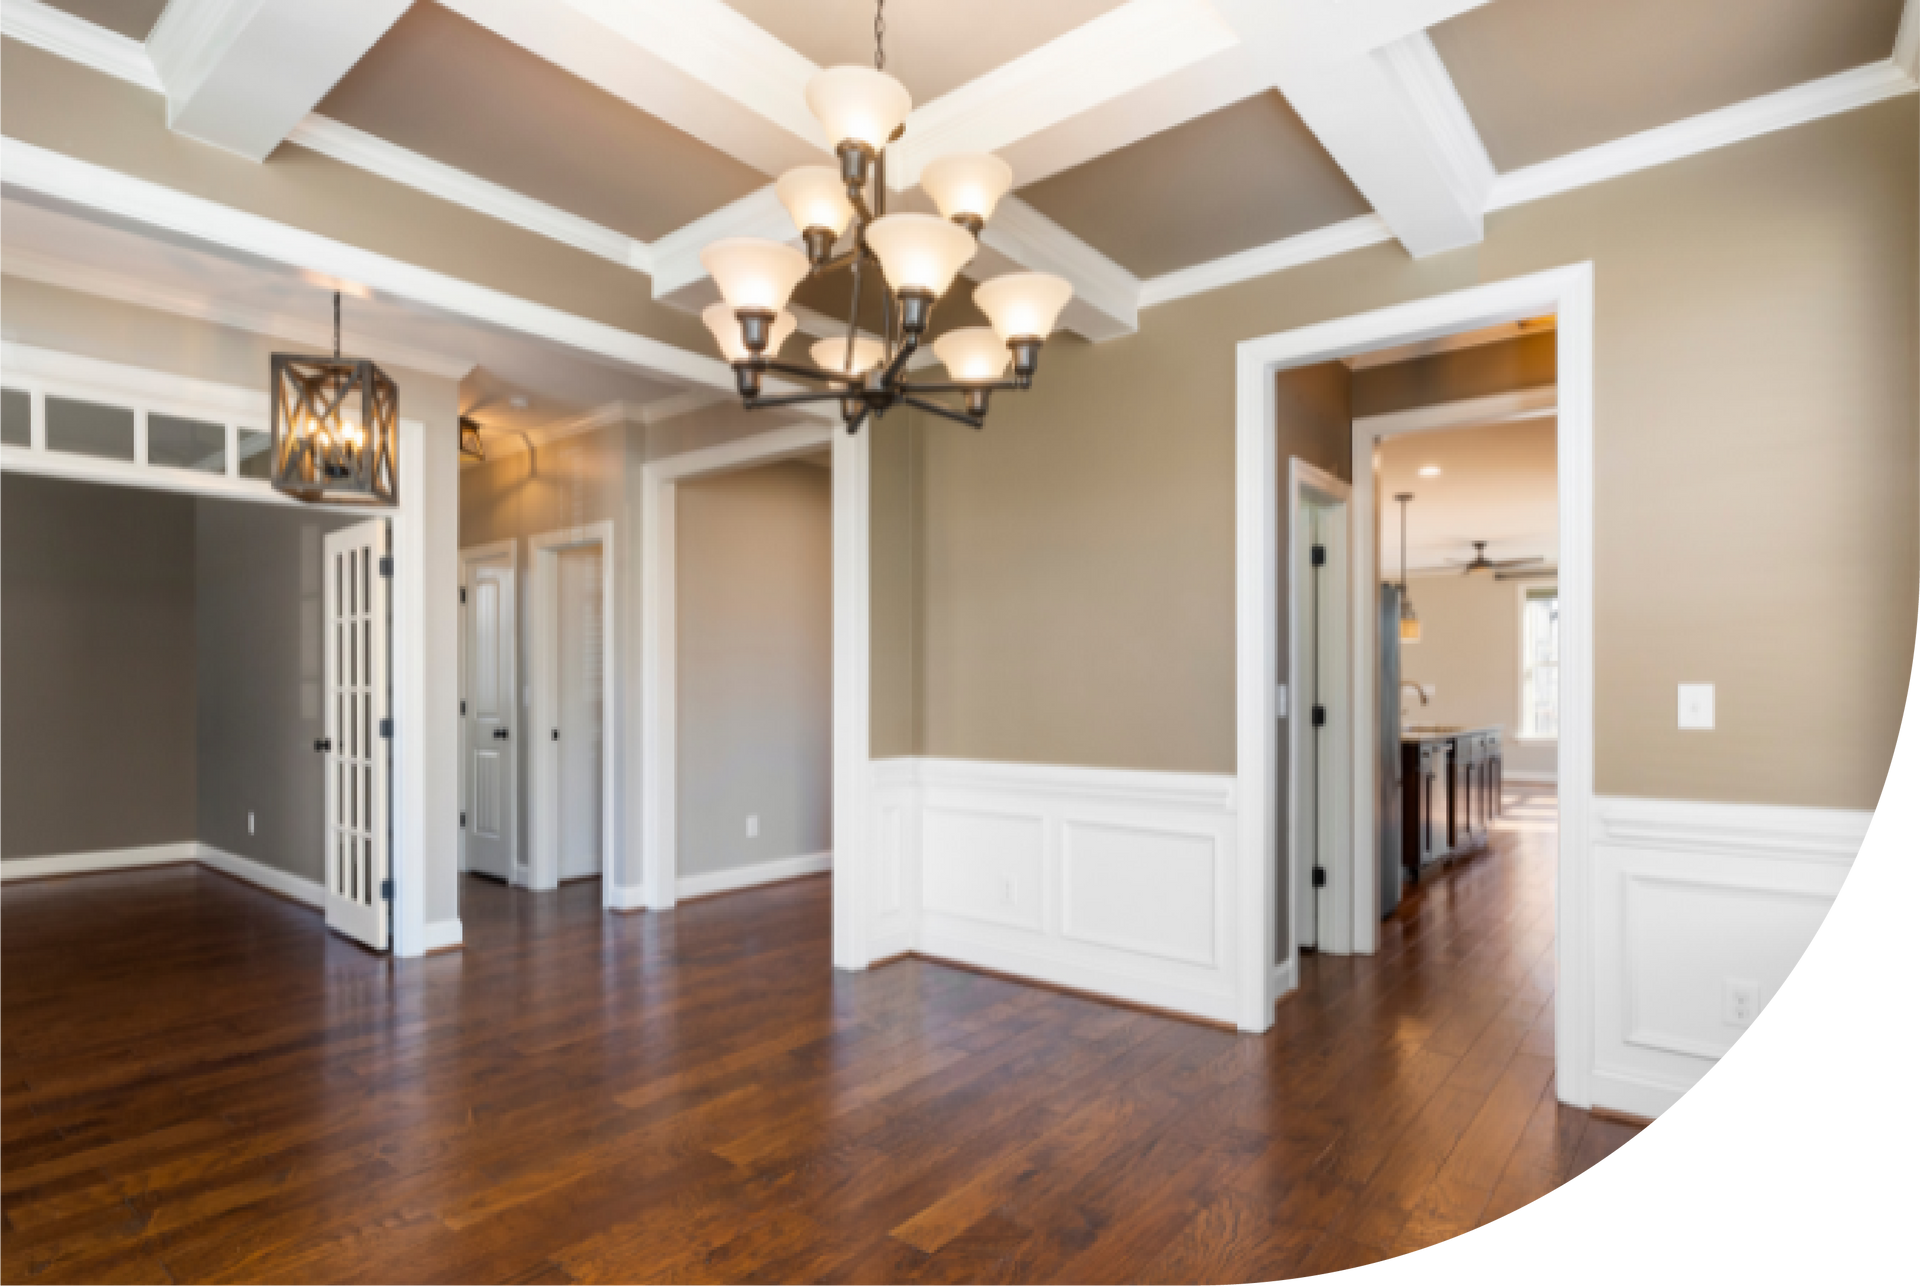 An empty room with hardwood floors and a chandelier hanging from the ceiling.